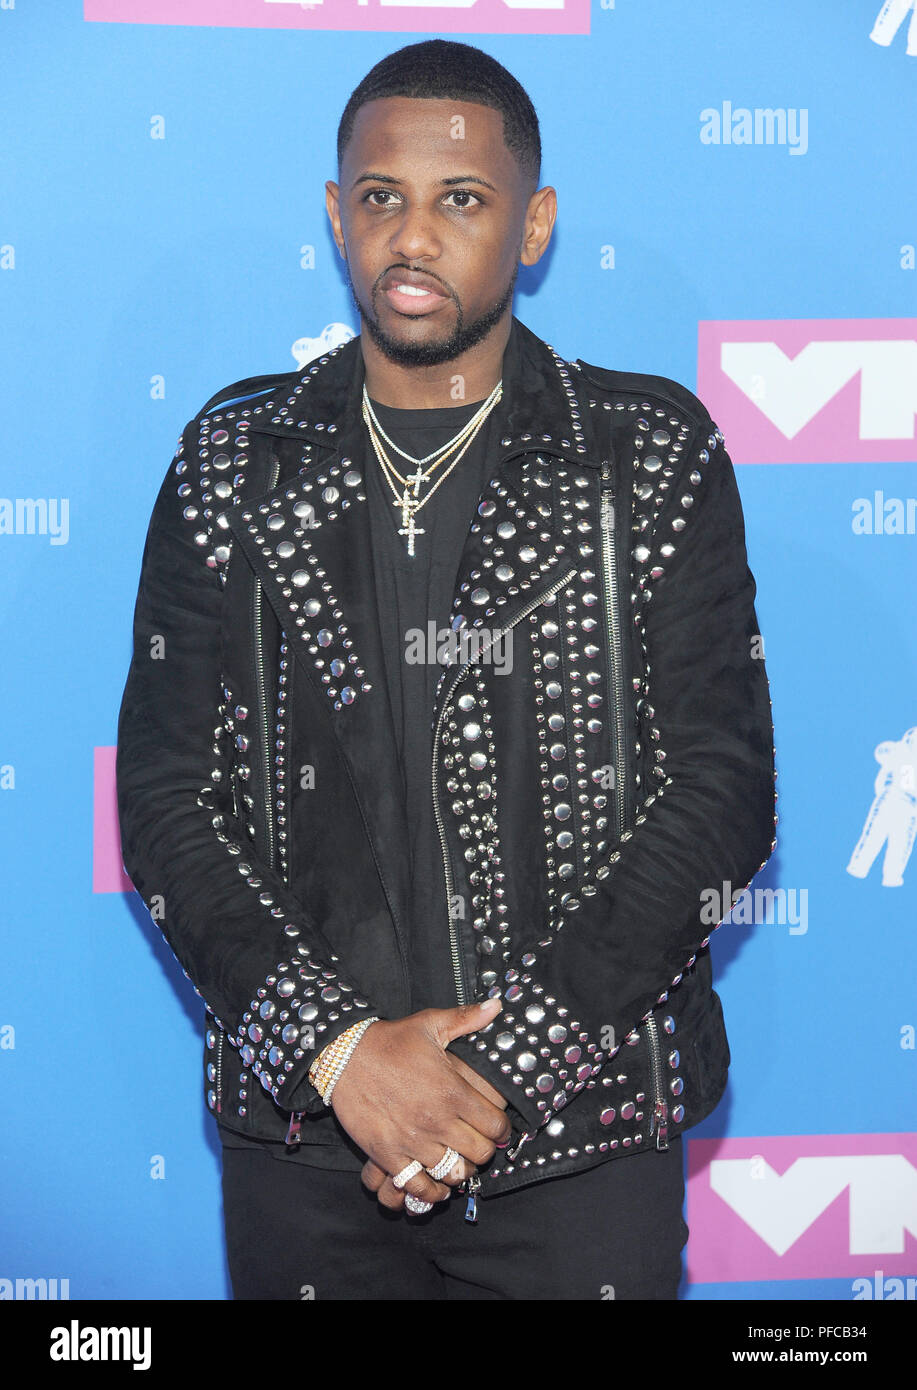 New York, NY, USA. 20th Aug, 2018. Fabolous attends the 2018 MTV Video Music Awards at Radio City Music Hall on August 20, 2018 in New York City. Credit: John Palmer/Media Punch/Alamy Live News Stock Photo